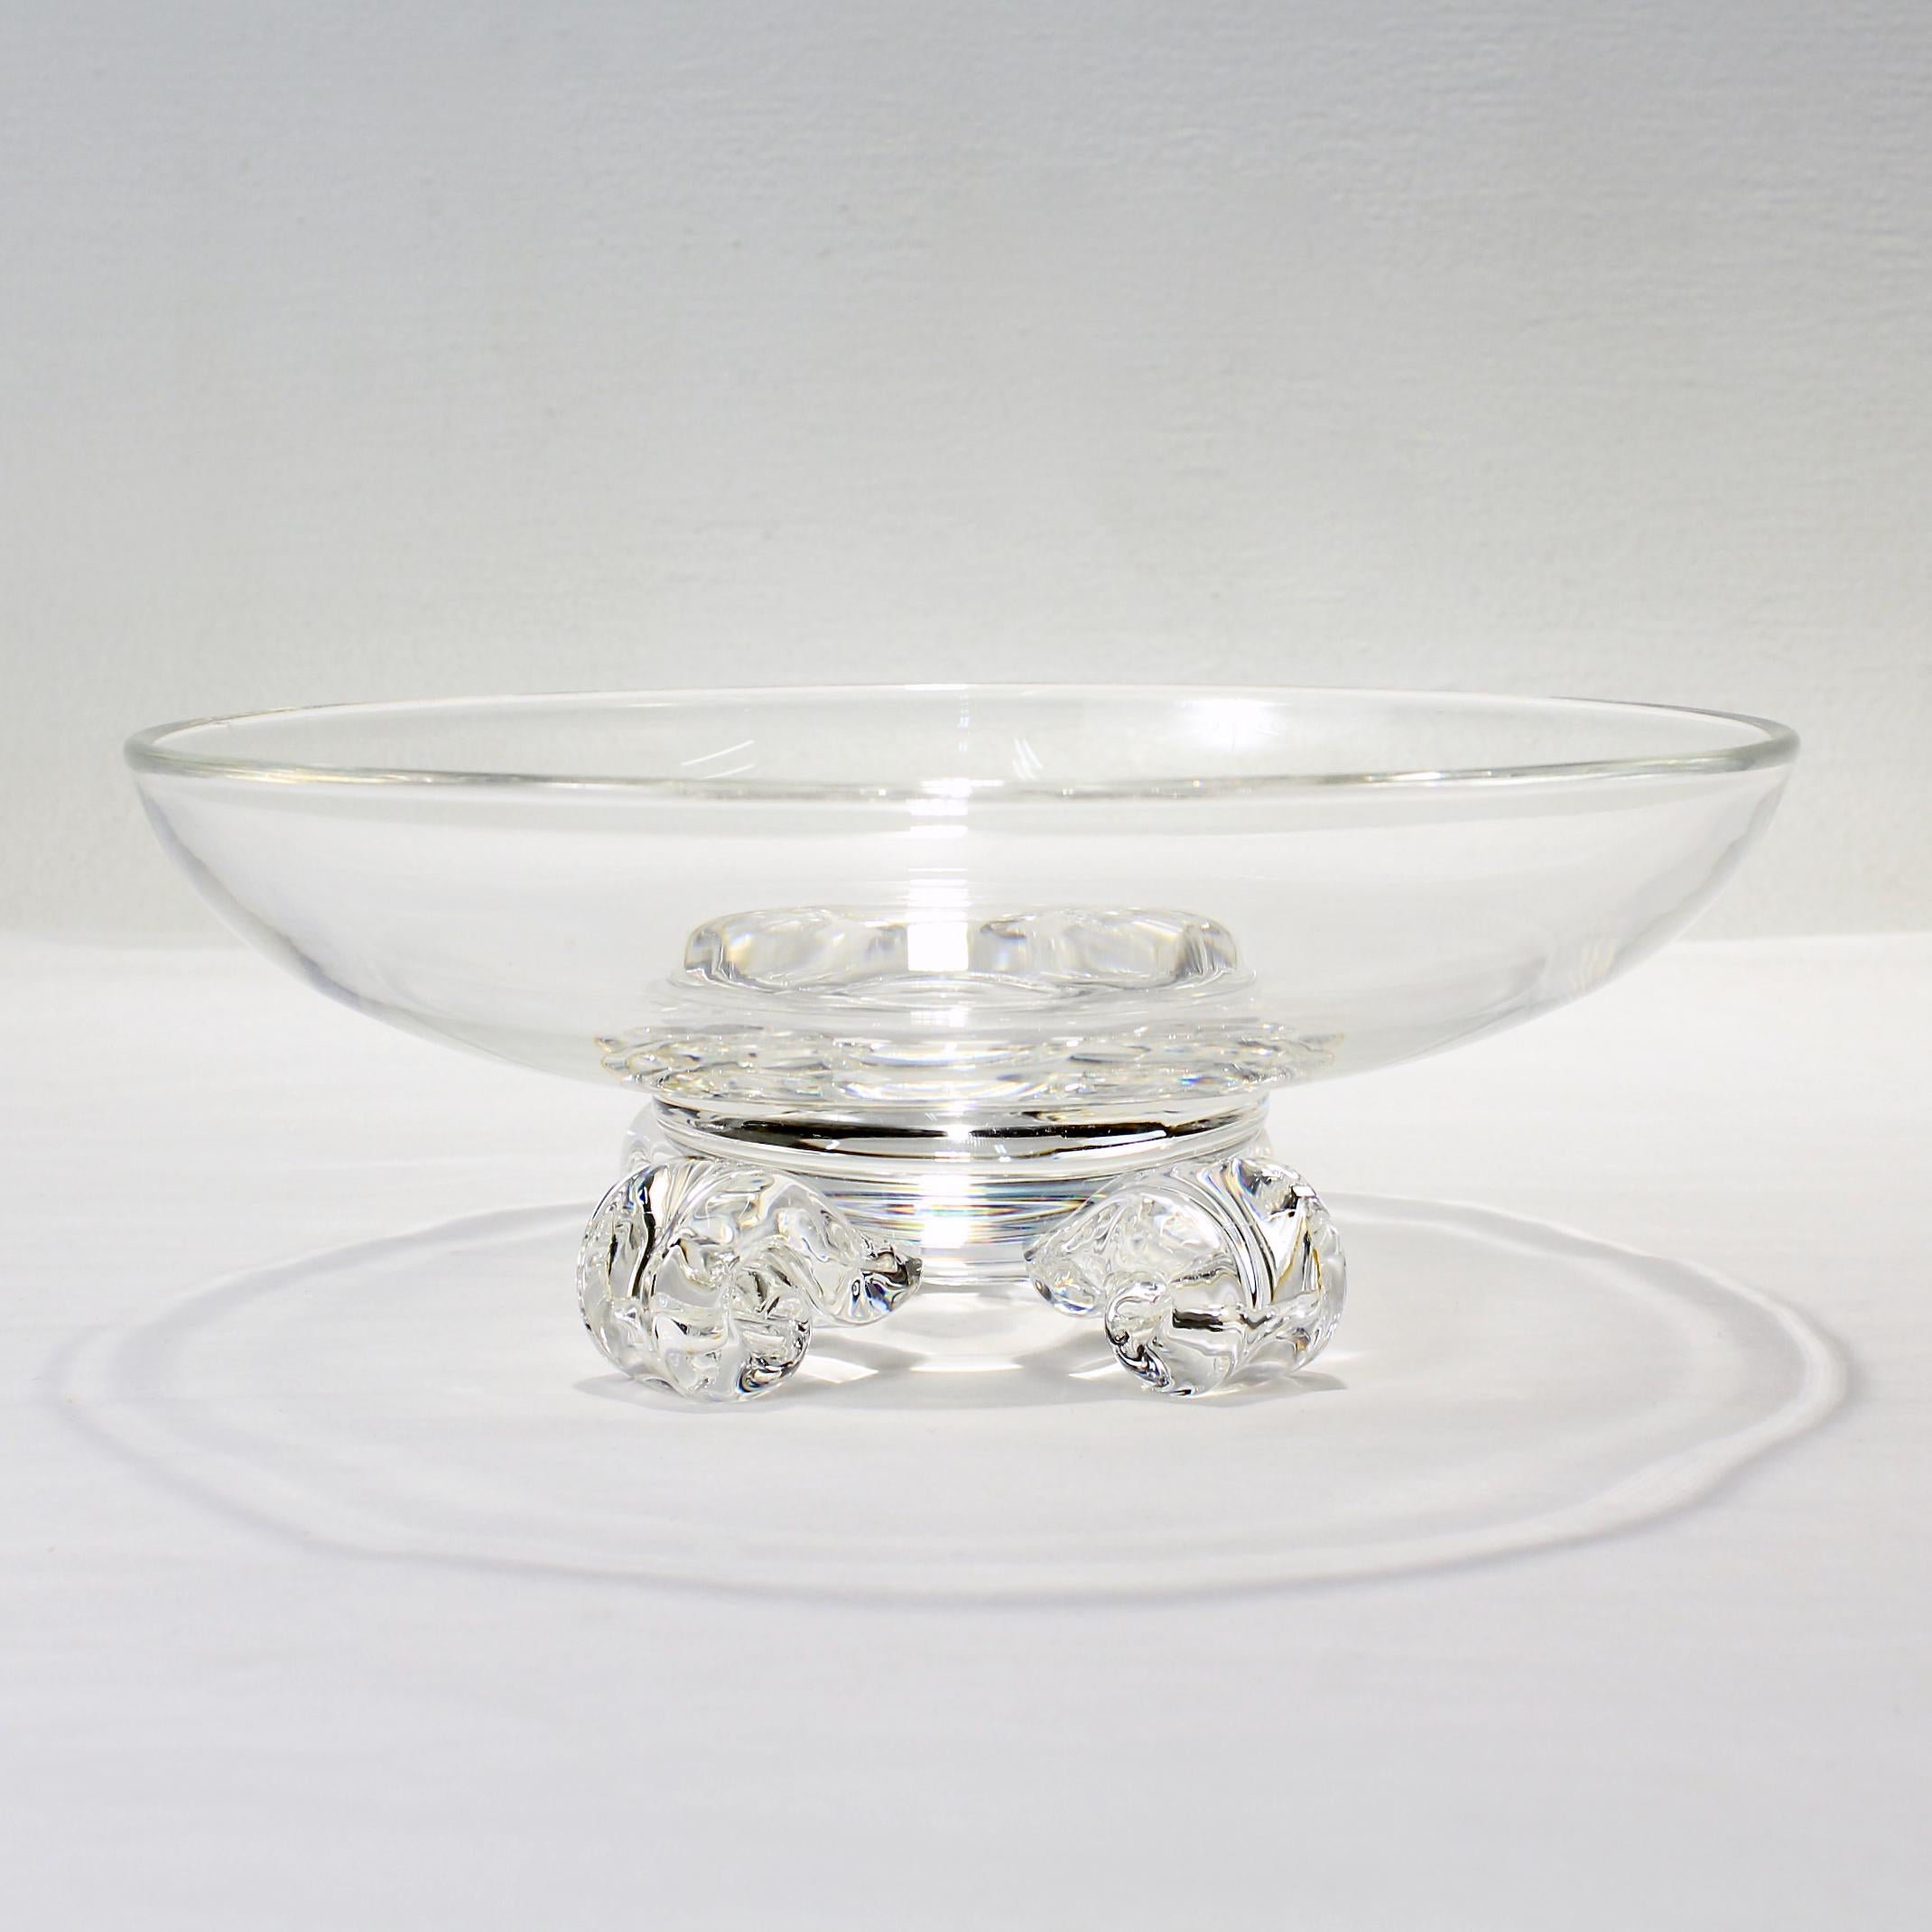 A fine mid-century footed art glass bowl.

By Steuben Glassworks.

Designed by John Dreves.

Model No. 7907

Supported by 4 scroll-shaped feet. 

Simply a great glass bowl from Steuben!

Date:
20th century

Overall condition:
It is